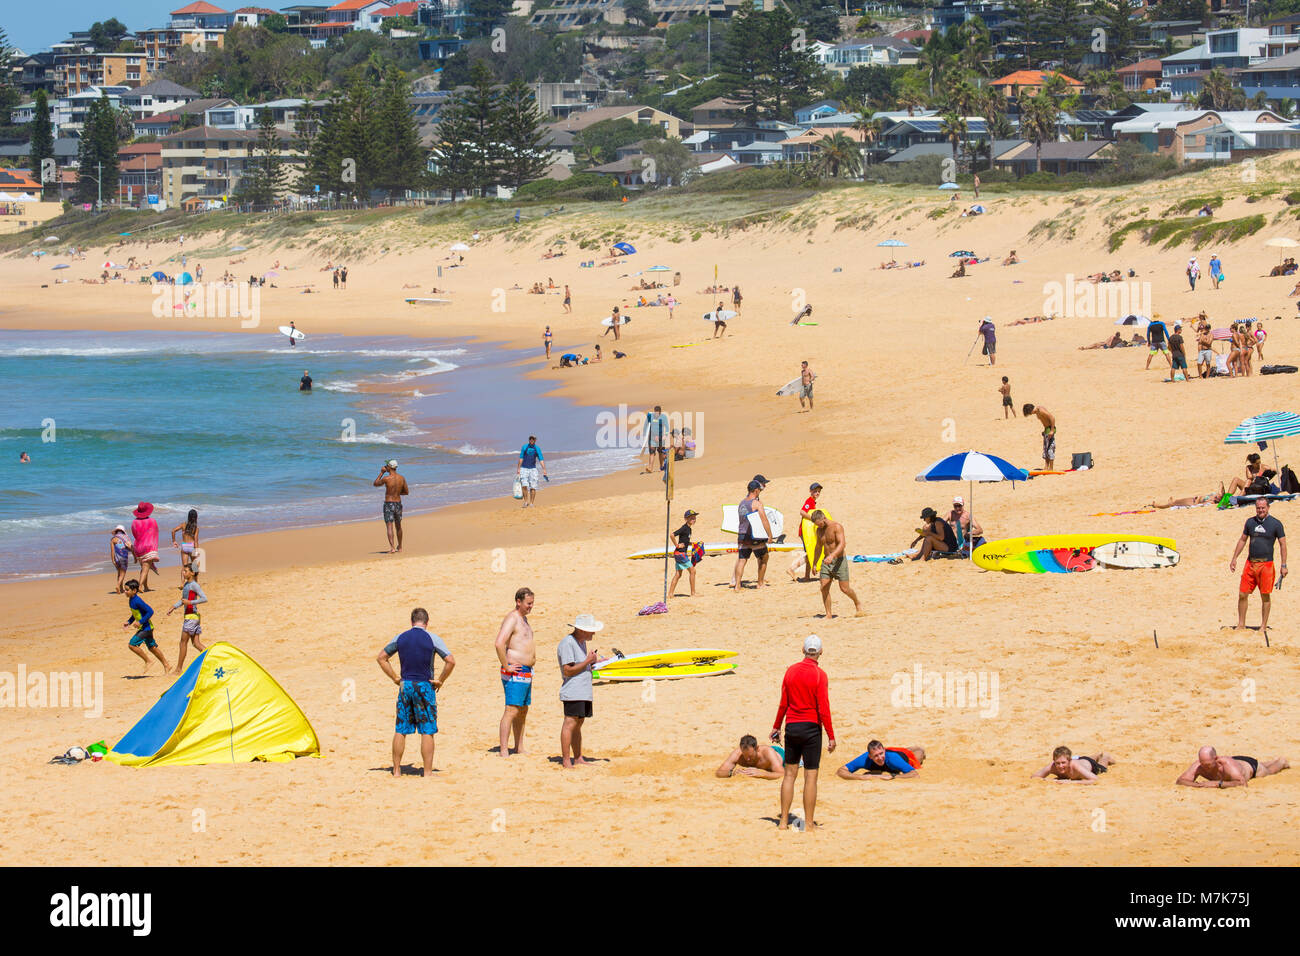 People enjoying warm autumn day on North Curl curl beach looking towards south curl curl beach,Sydney,Australia Stock Photo